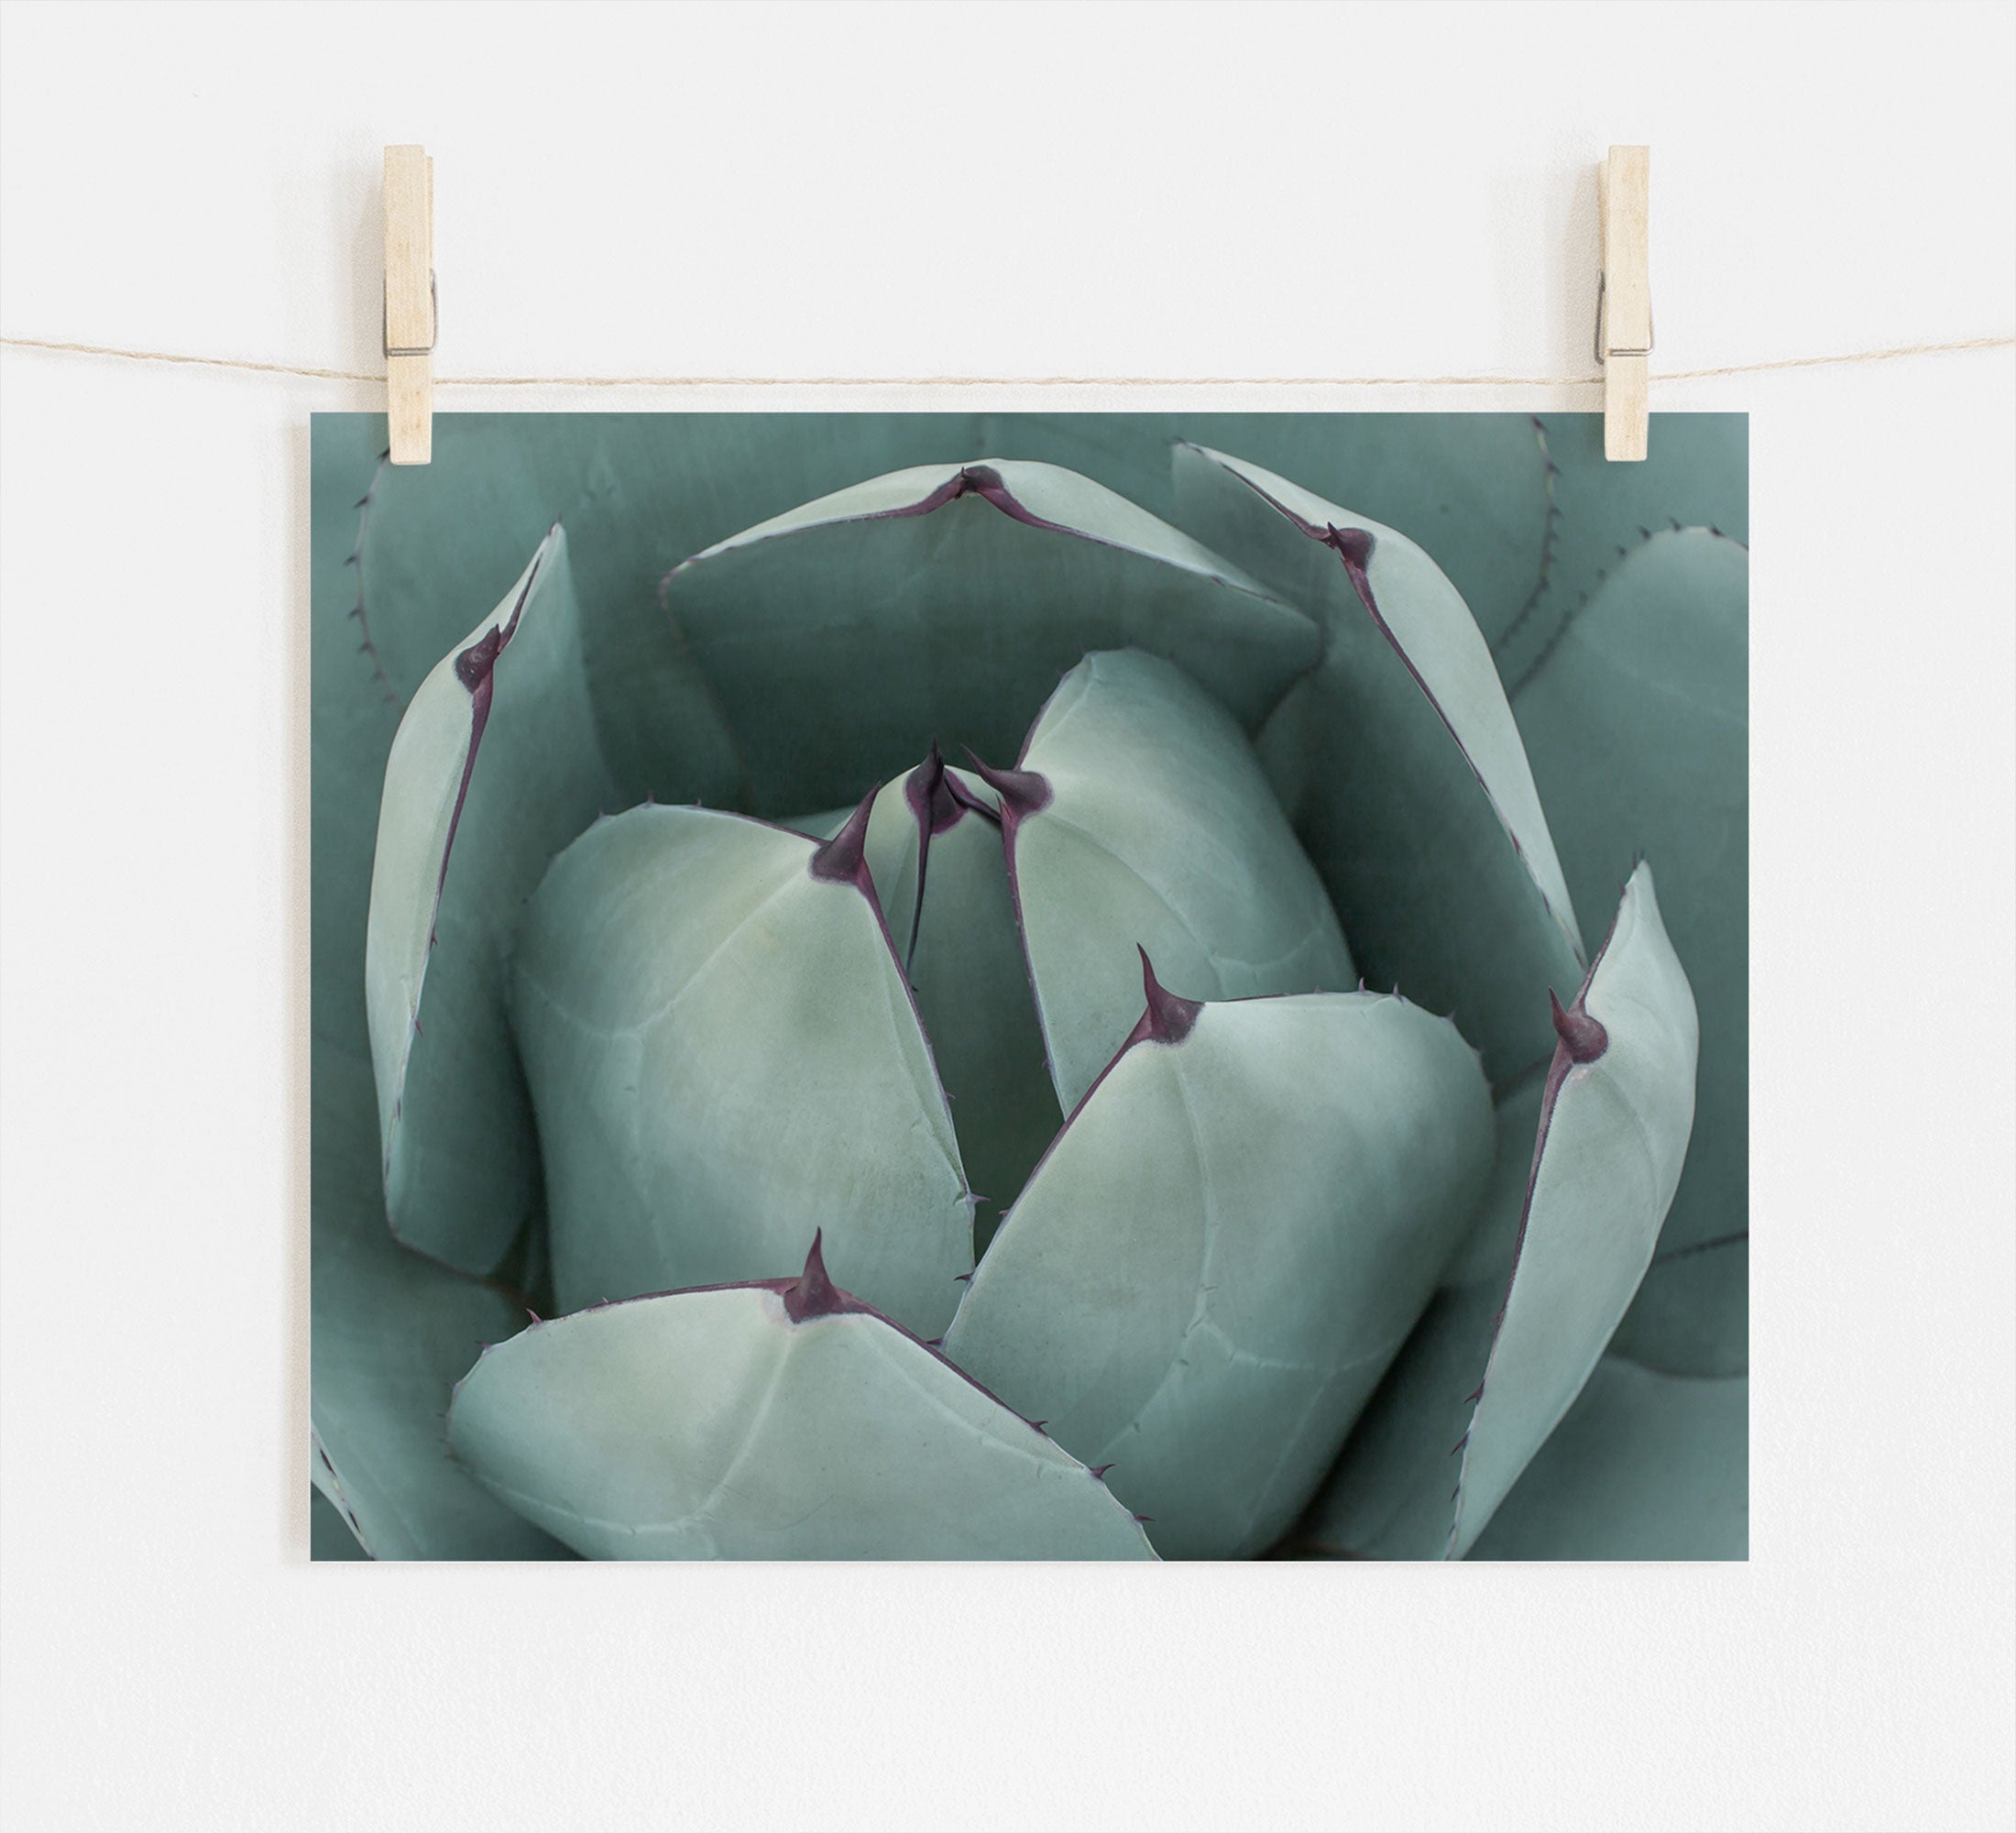 A close-up photo of a succulent plant with plump, green leaves and deep purple tips, pinned onto a white wall by wooden clothespins on a string, printed on archival photographic paper by Offley Green&#39;s Abstract Teal Green Botanical Print, &#39;Teal Petals&#39;.